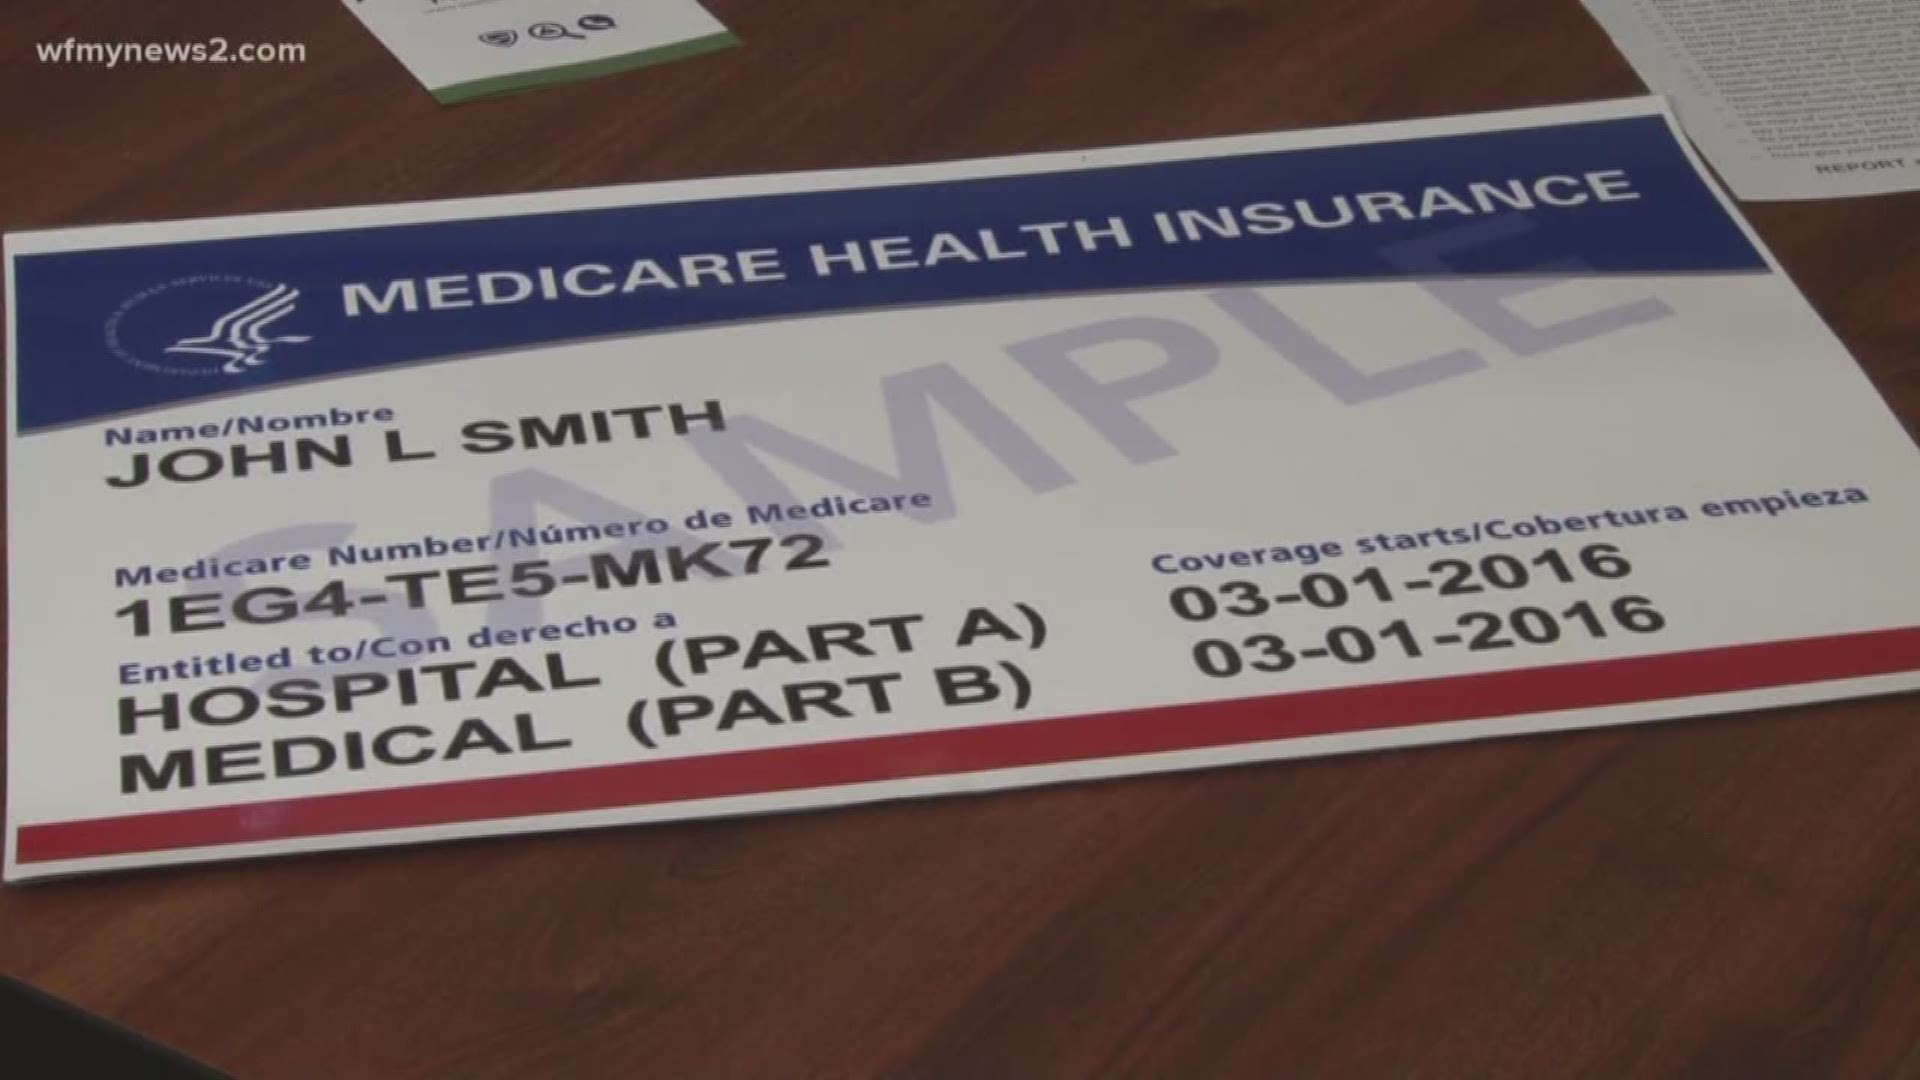 New Medicare cards are coming out and scammers know it. Here's how they'll try to scam you...